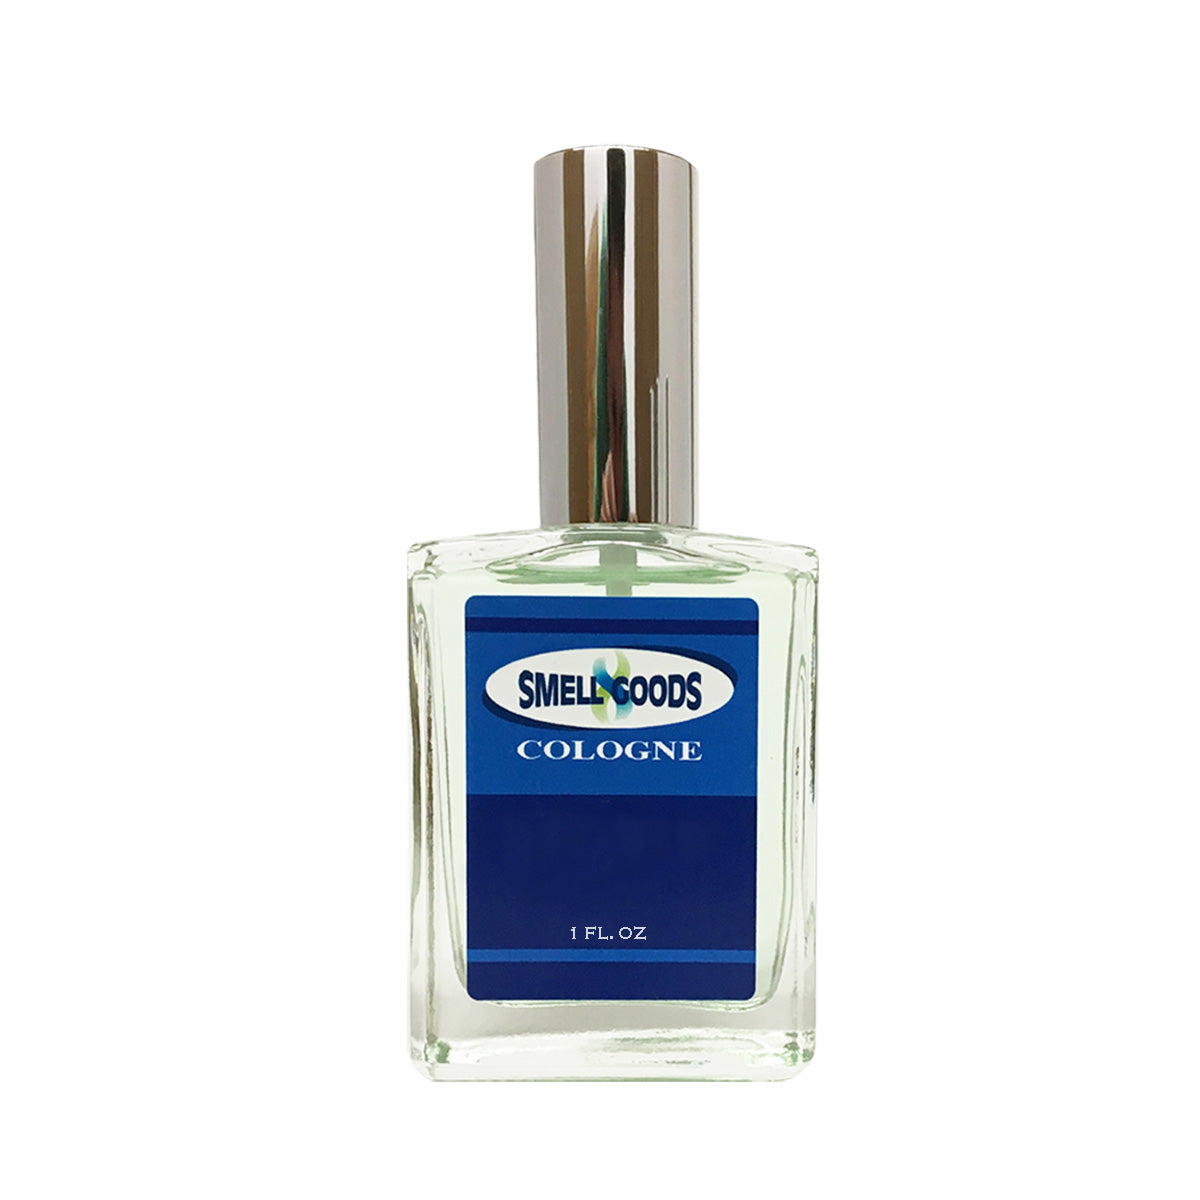 360 Degrees by Perry Ellis Type (Men) Cologne Spray